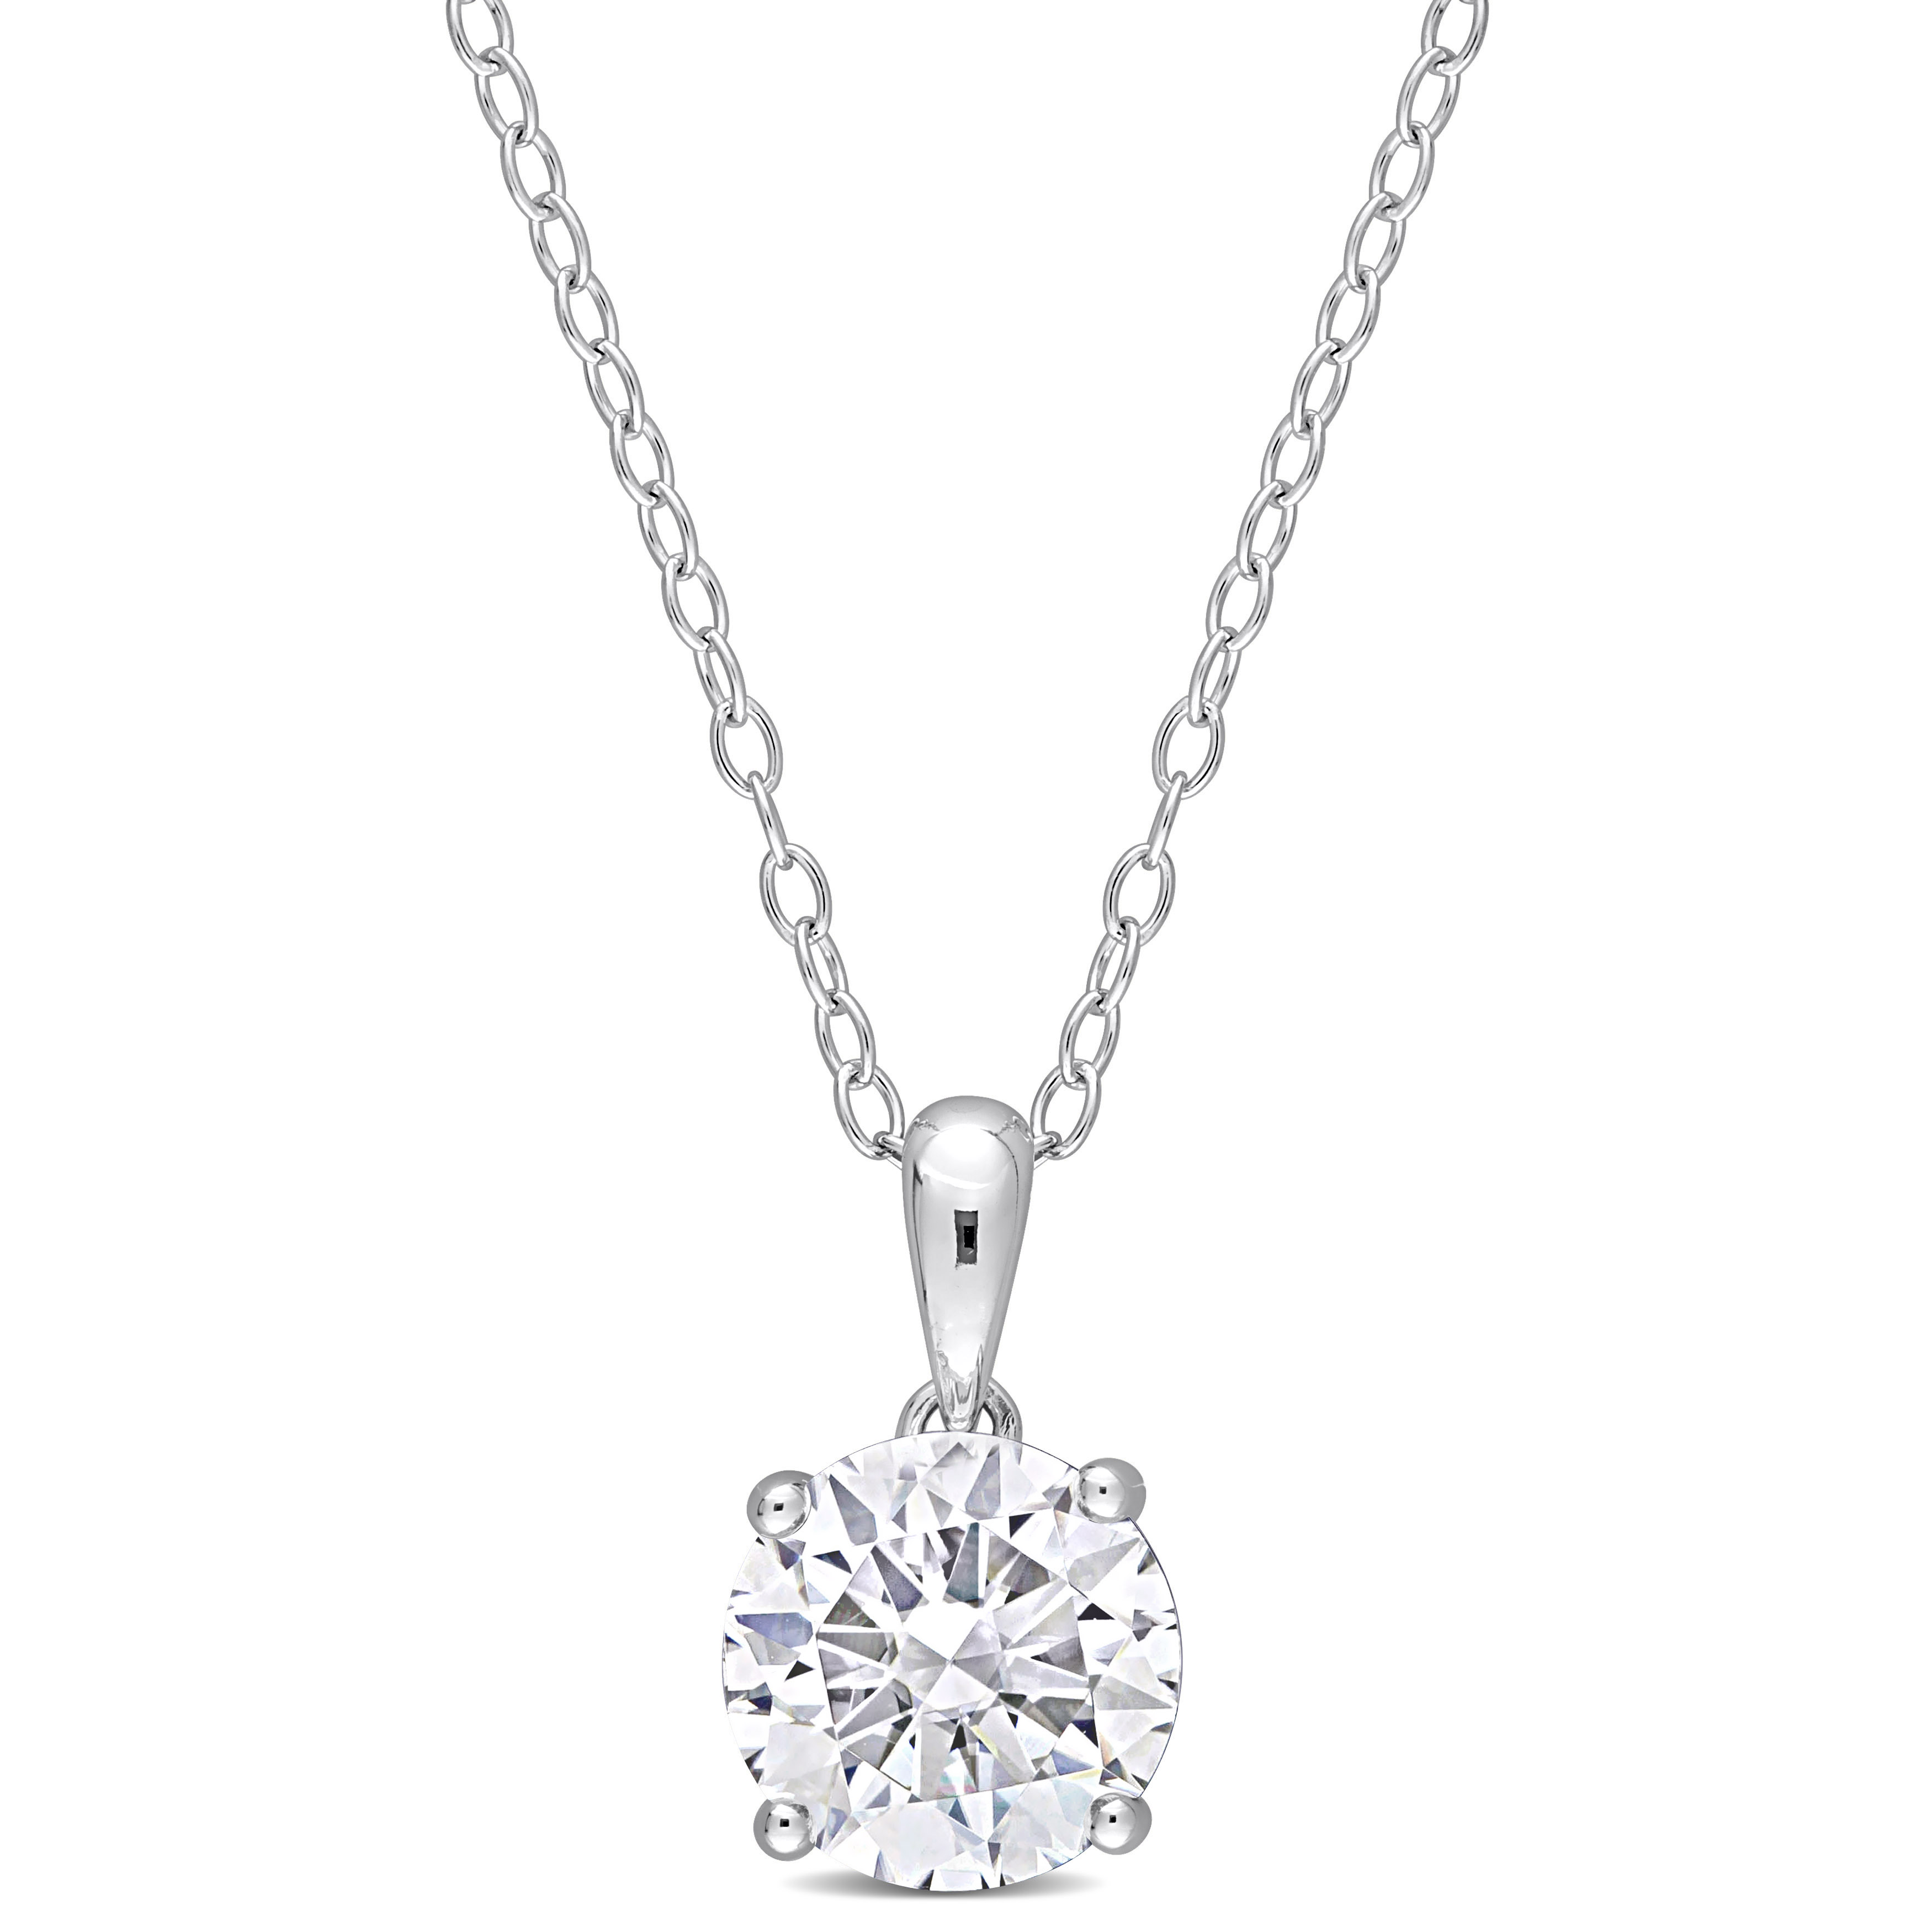 2 3/8 CT TGW Created White Sapphire Solitaire Heart Design Pendant with Chain in Sterling Silver - 18 in.